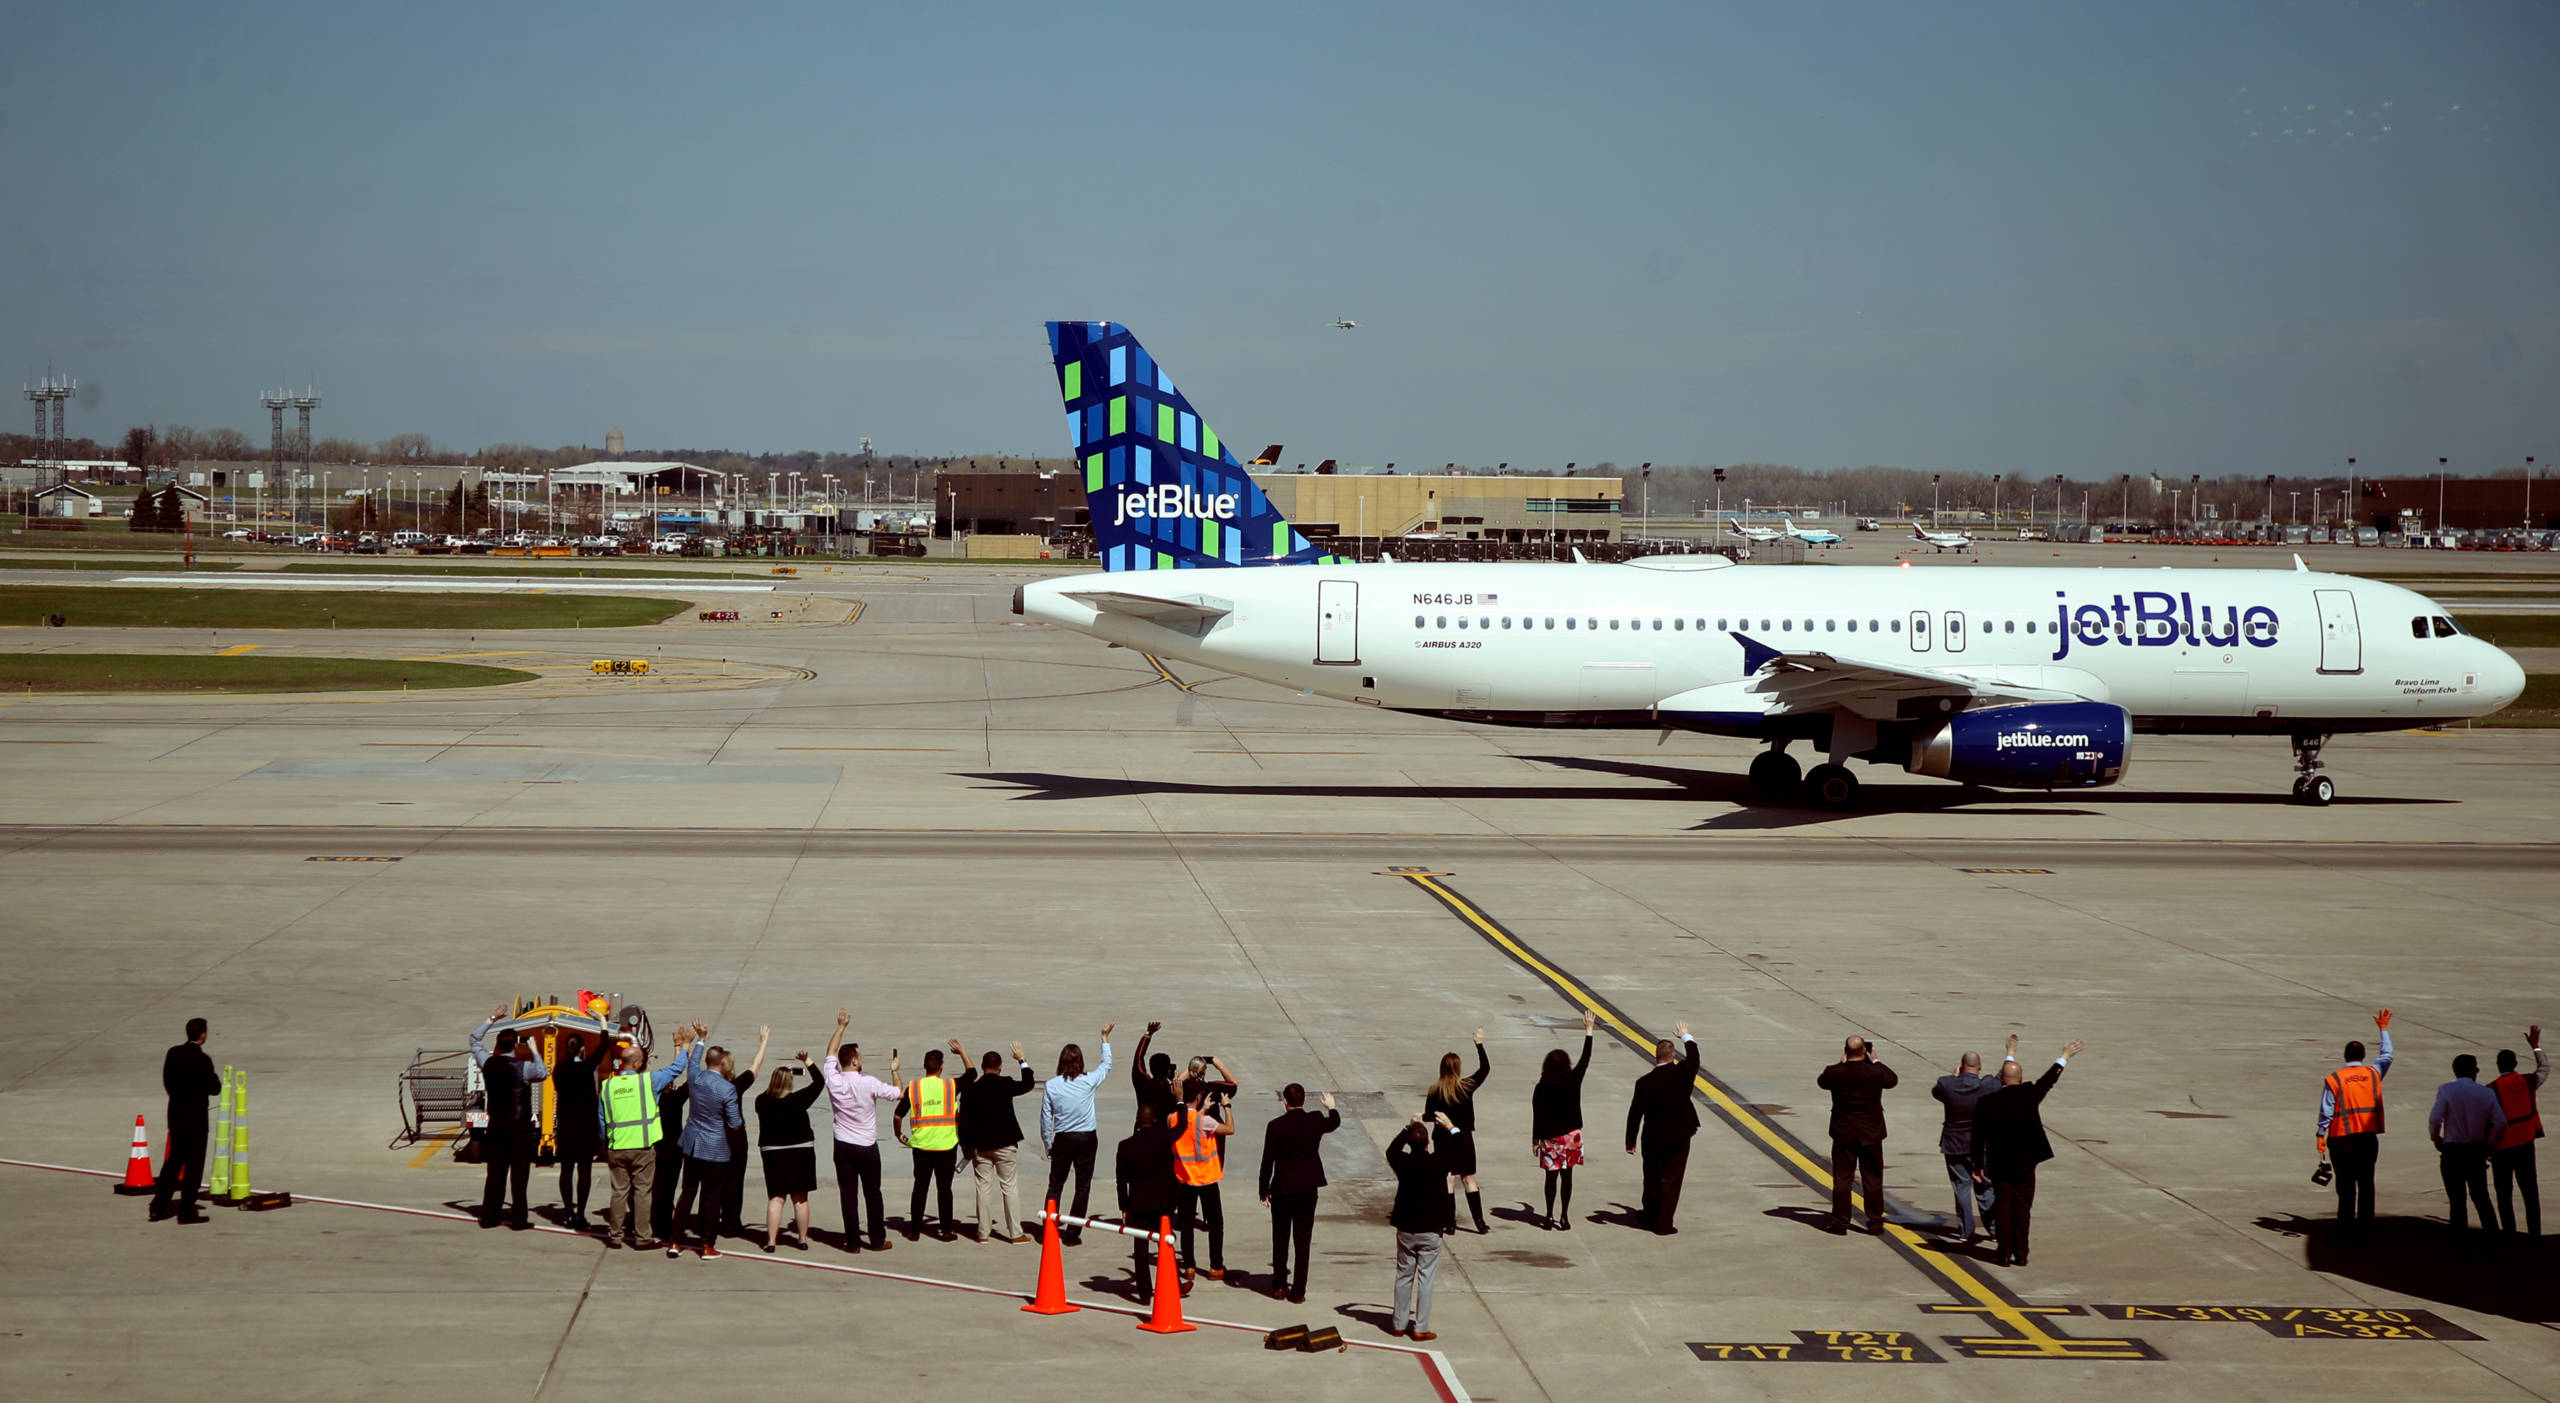 JetBlue's head of air service, and ground crew members waved goodbye as JetBlue flight 836 begins service at MSP to Boston Thursday May 3, 2018 Bloomington, MN. ] JERRY HOLT ‚Ä¢ jerry.holt@startribune.com